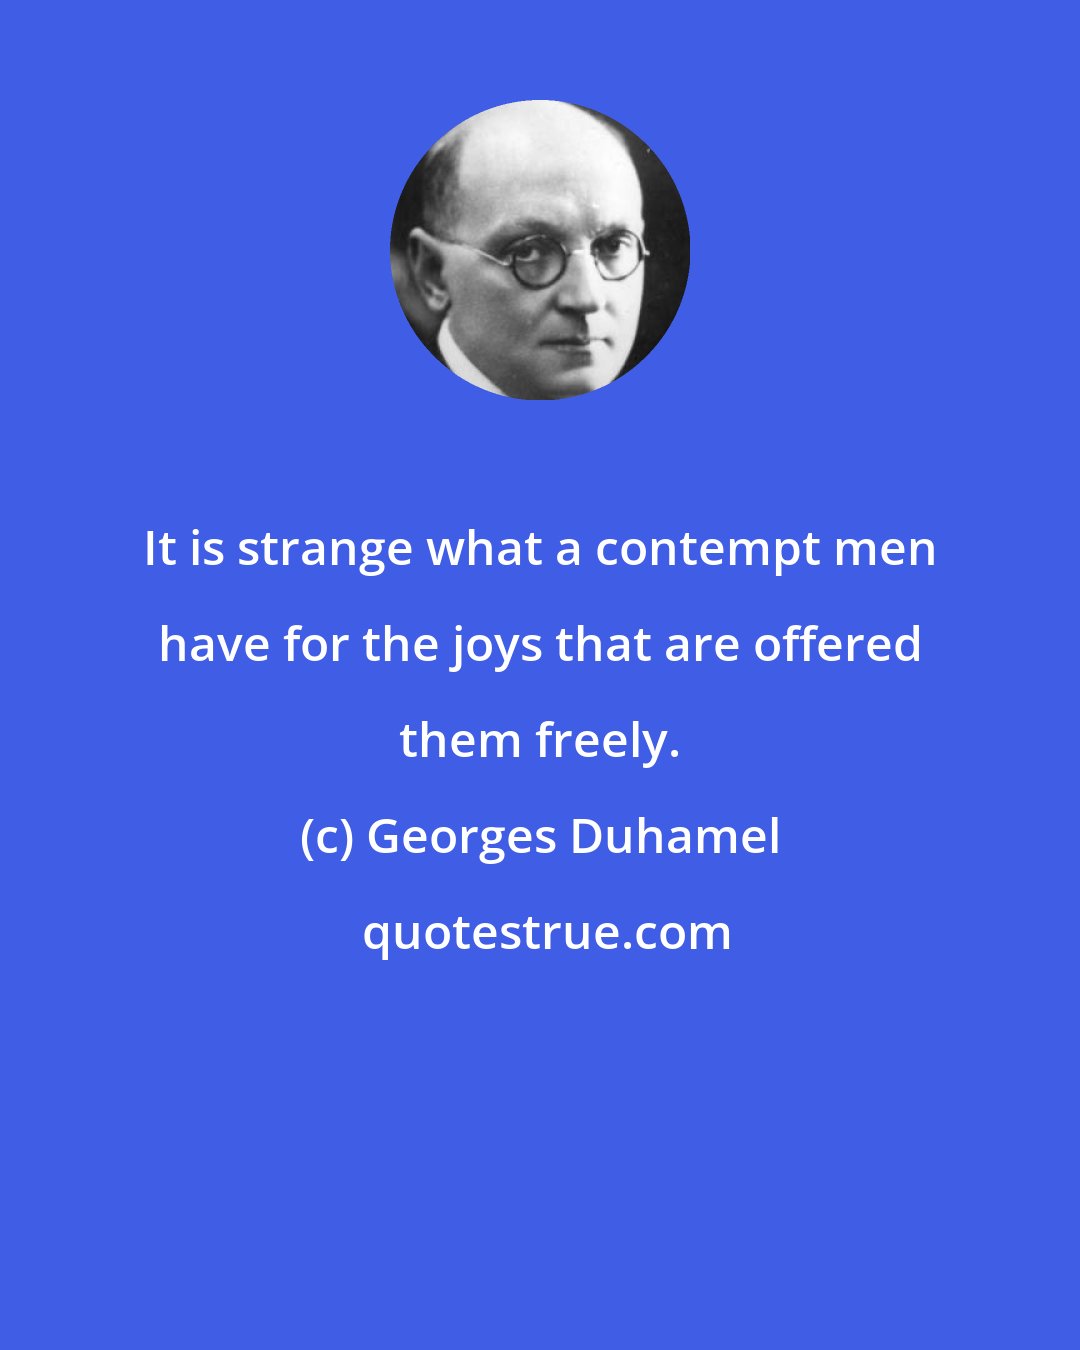 Georges Duhamel: It is strange what a contempt men have for the joys that are offered them freely.